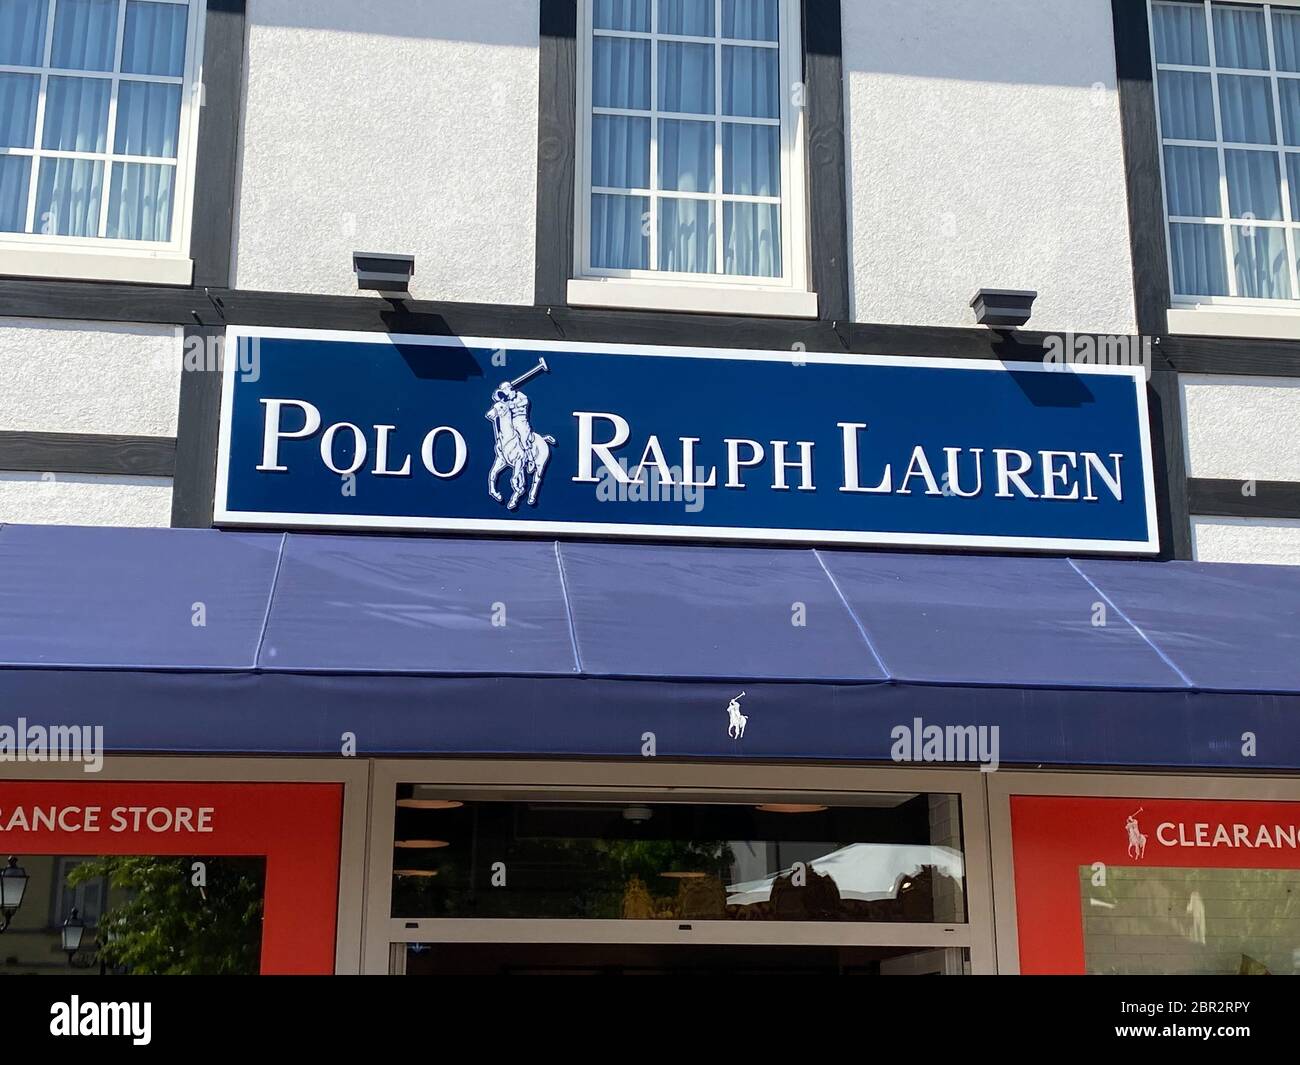 Roermond, Netherlands - May 19. 2020: View on facade with logo lettering of Ralph  Lauren Polo fashion company at shop entrance Stock Photo - Alamy